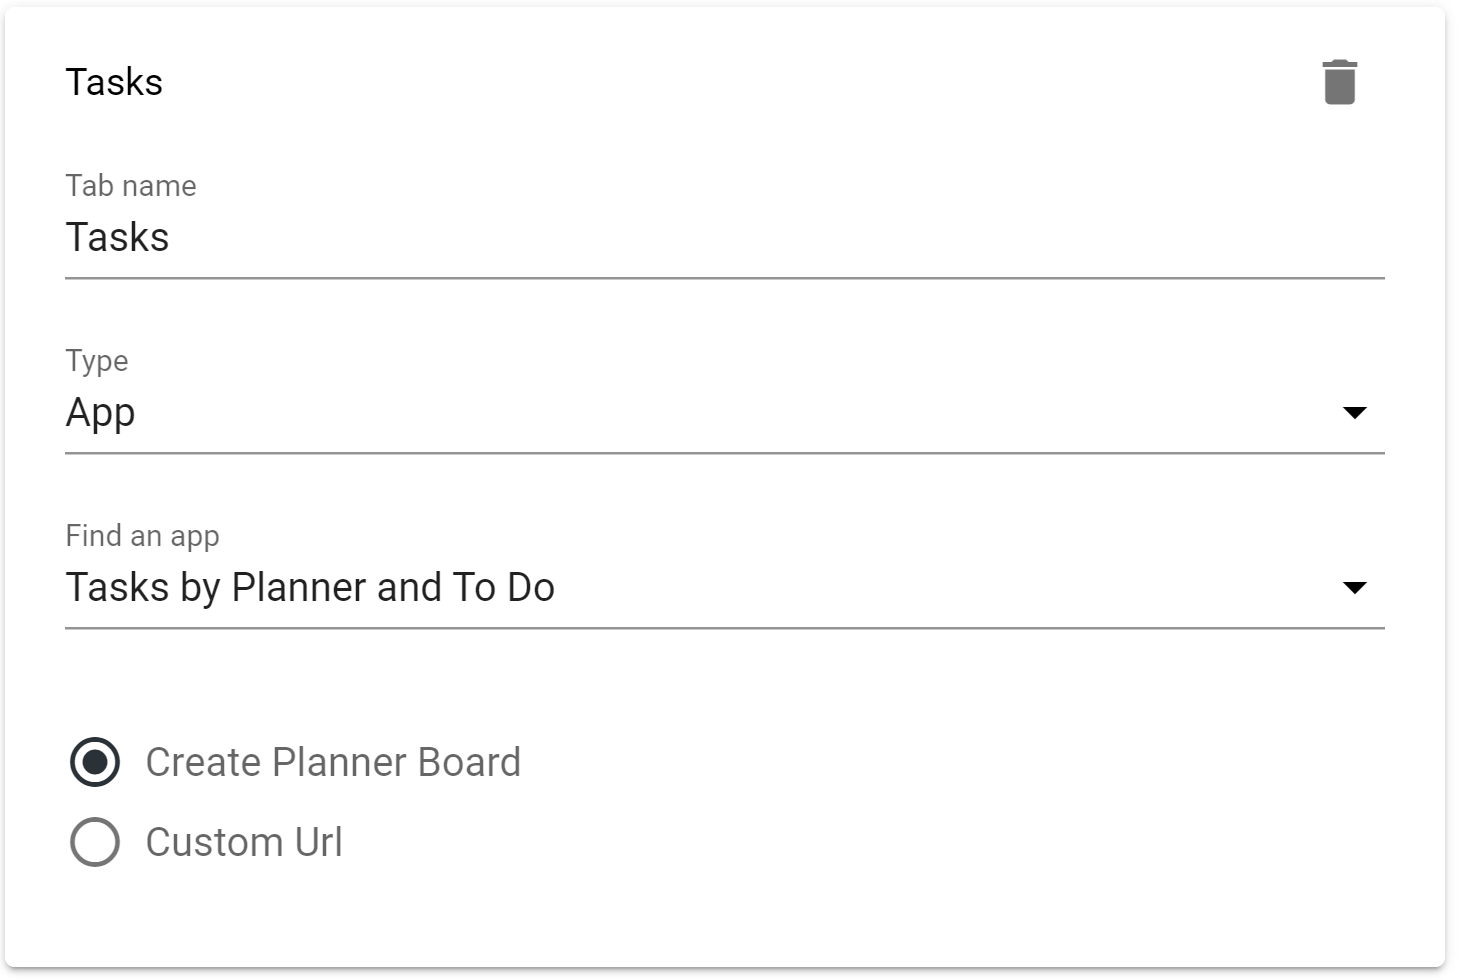 ../../_images/create-planner-board.png